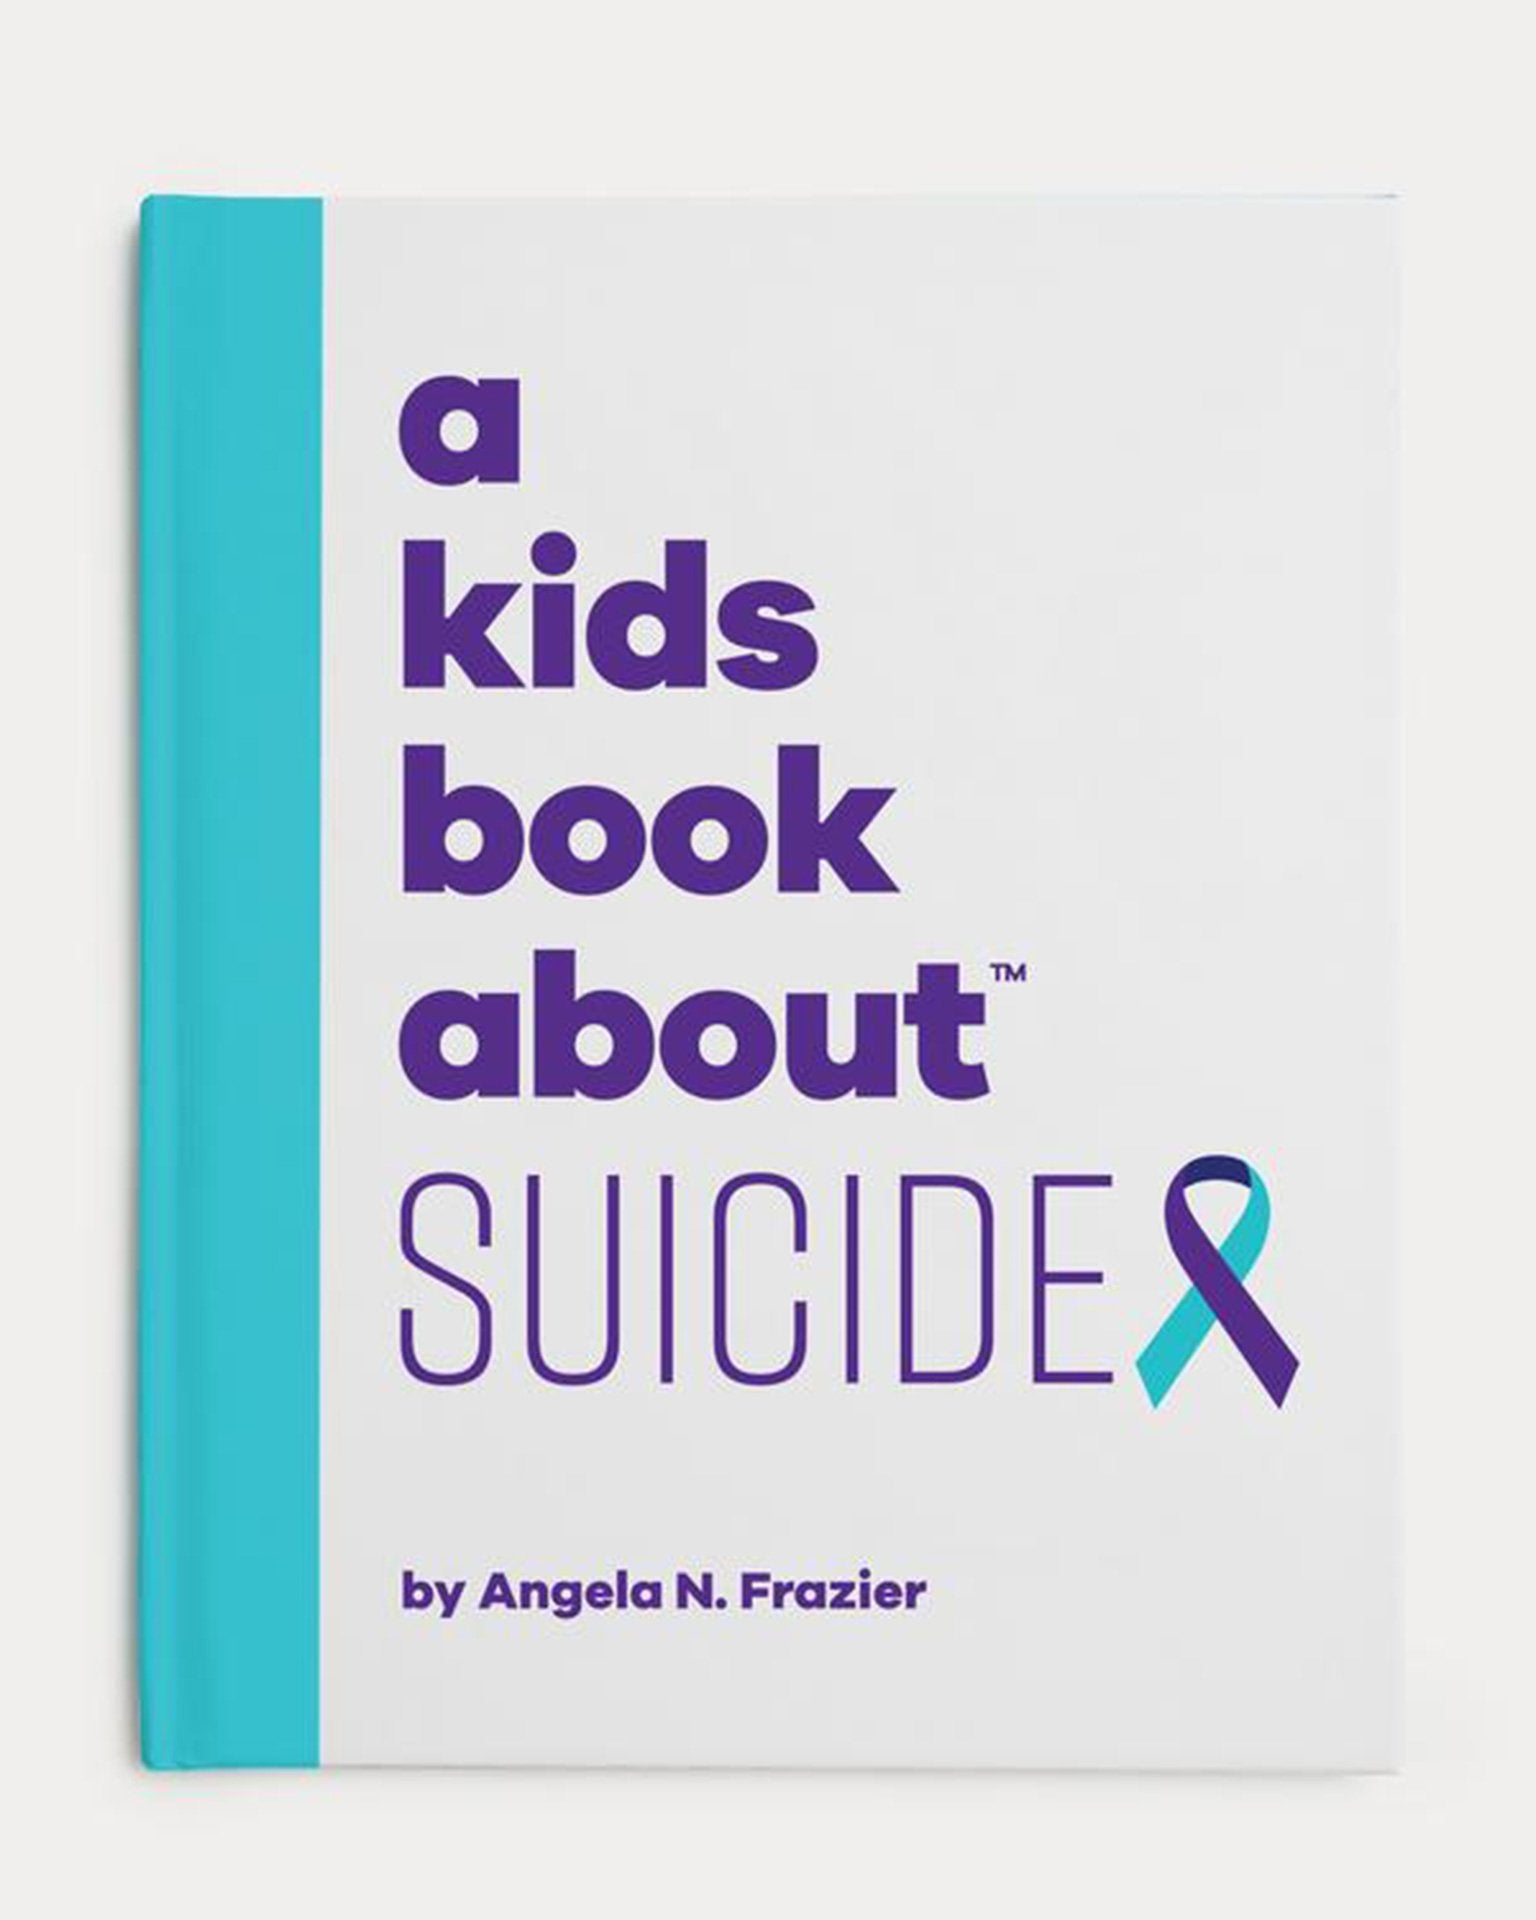 Little a kids book about play a kids book about suicide